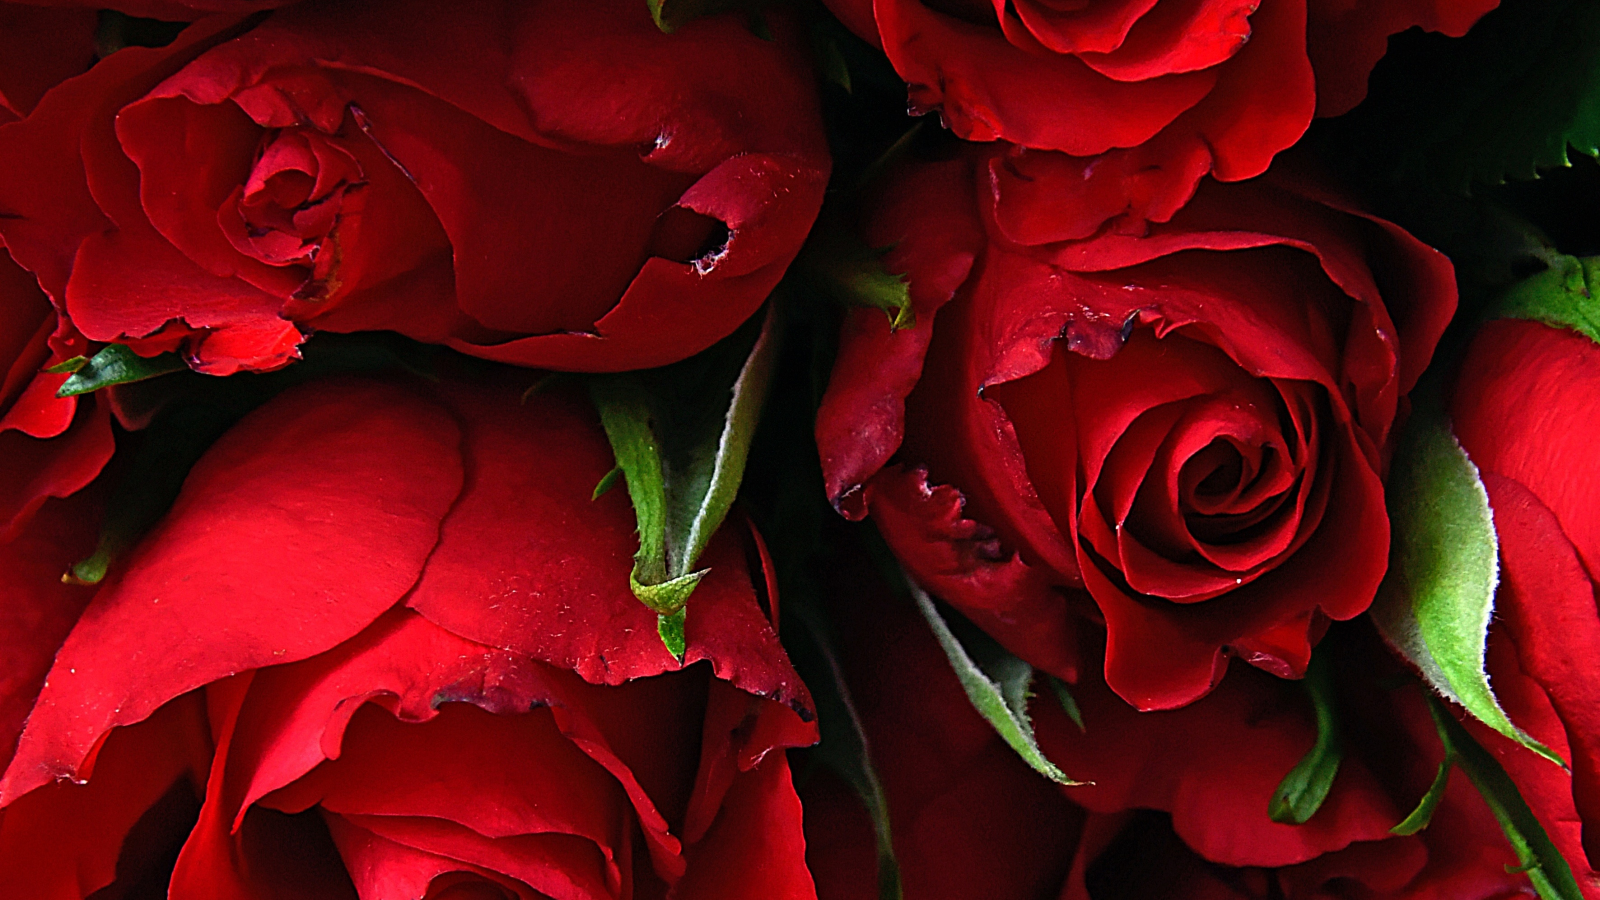 Download wallpaper 1600x900 rose, fresh, red flowers, 16:9 widescreen  1600x900 hd background, 18139